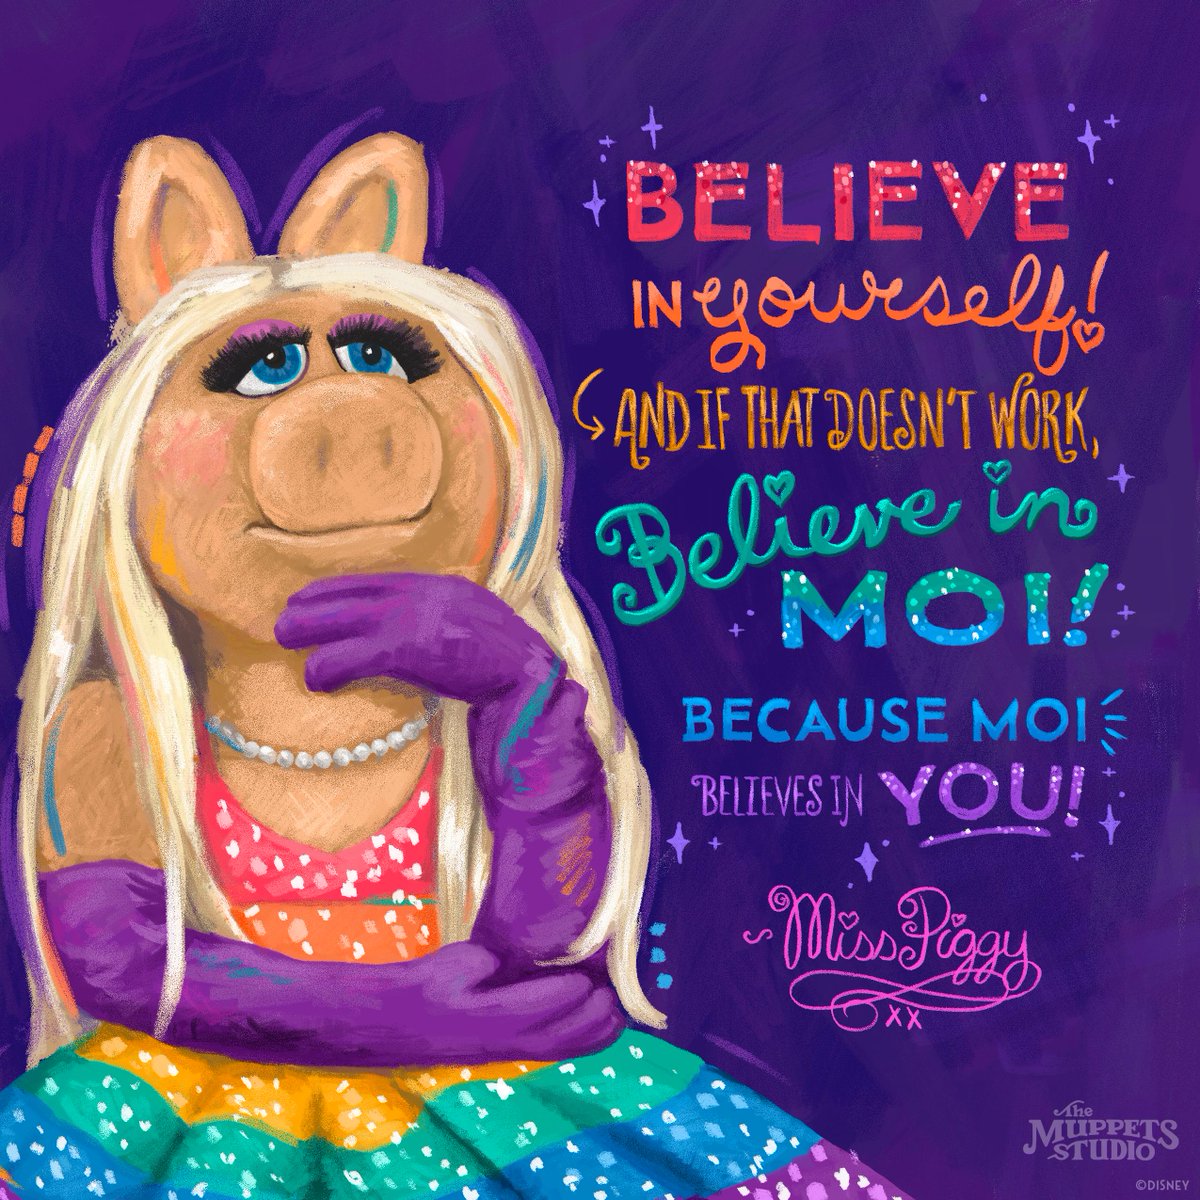 #CelebratePride and celebrate you! This #PrideMonth, remember that moi and all of The Muppets believe in you, love you, and support you.